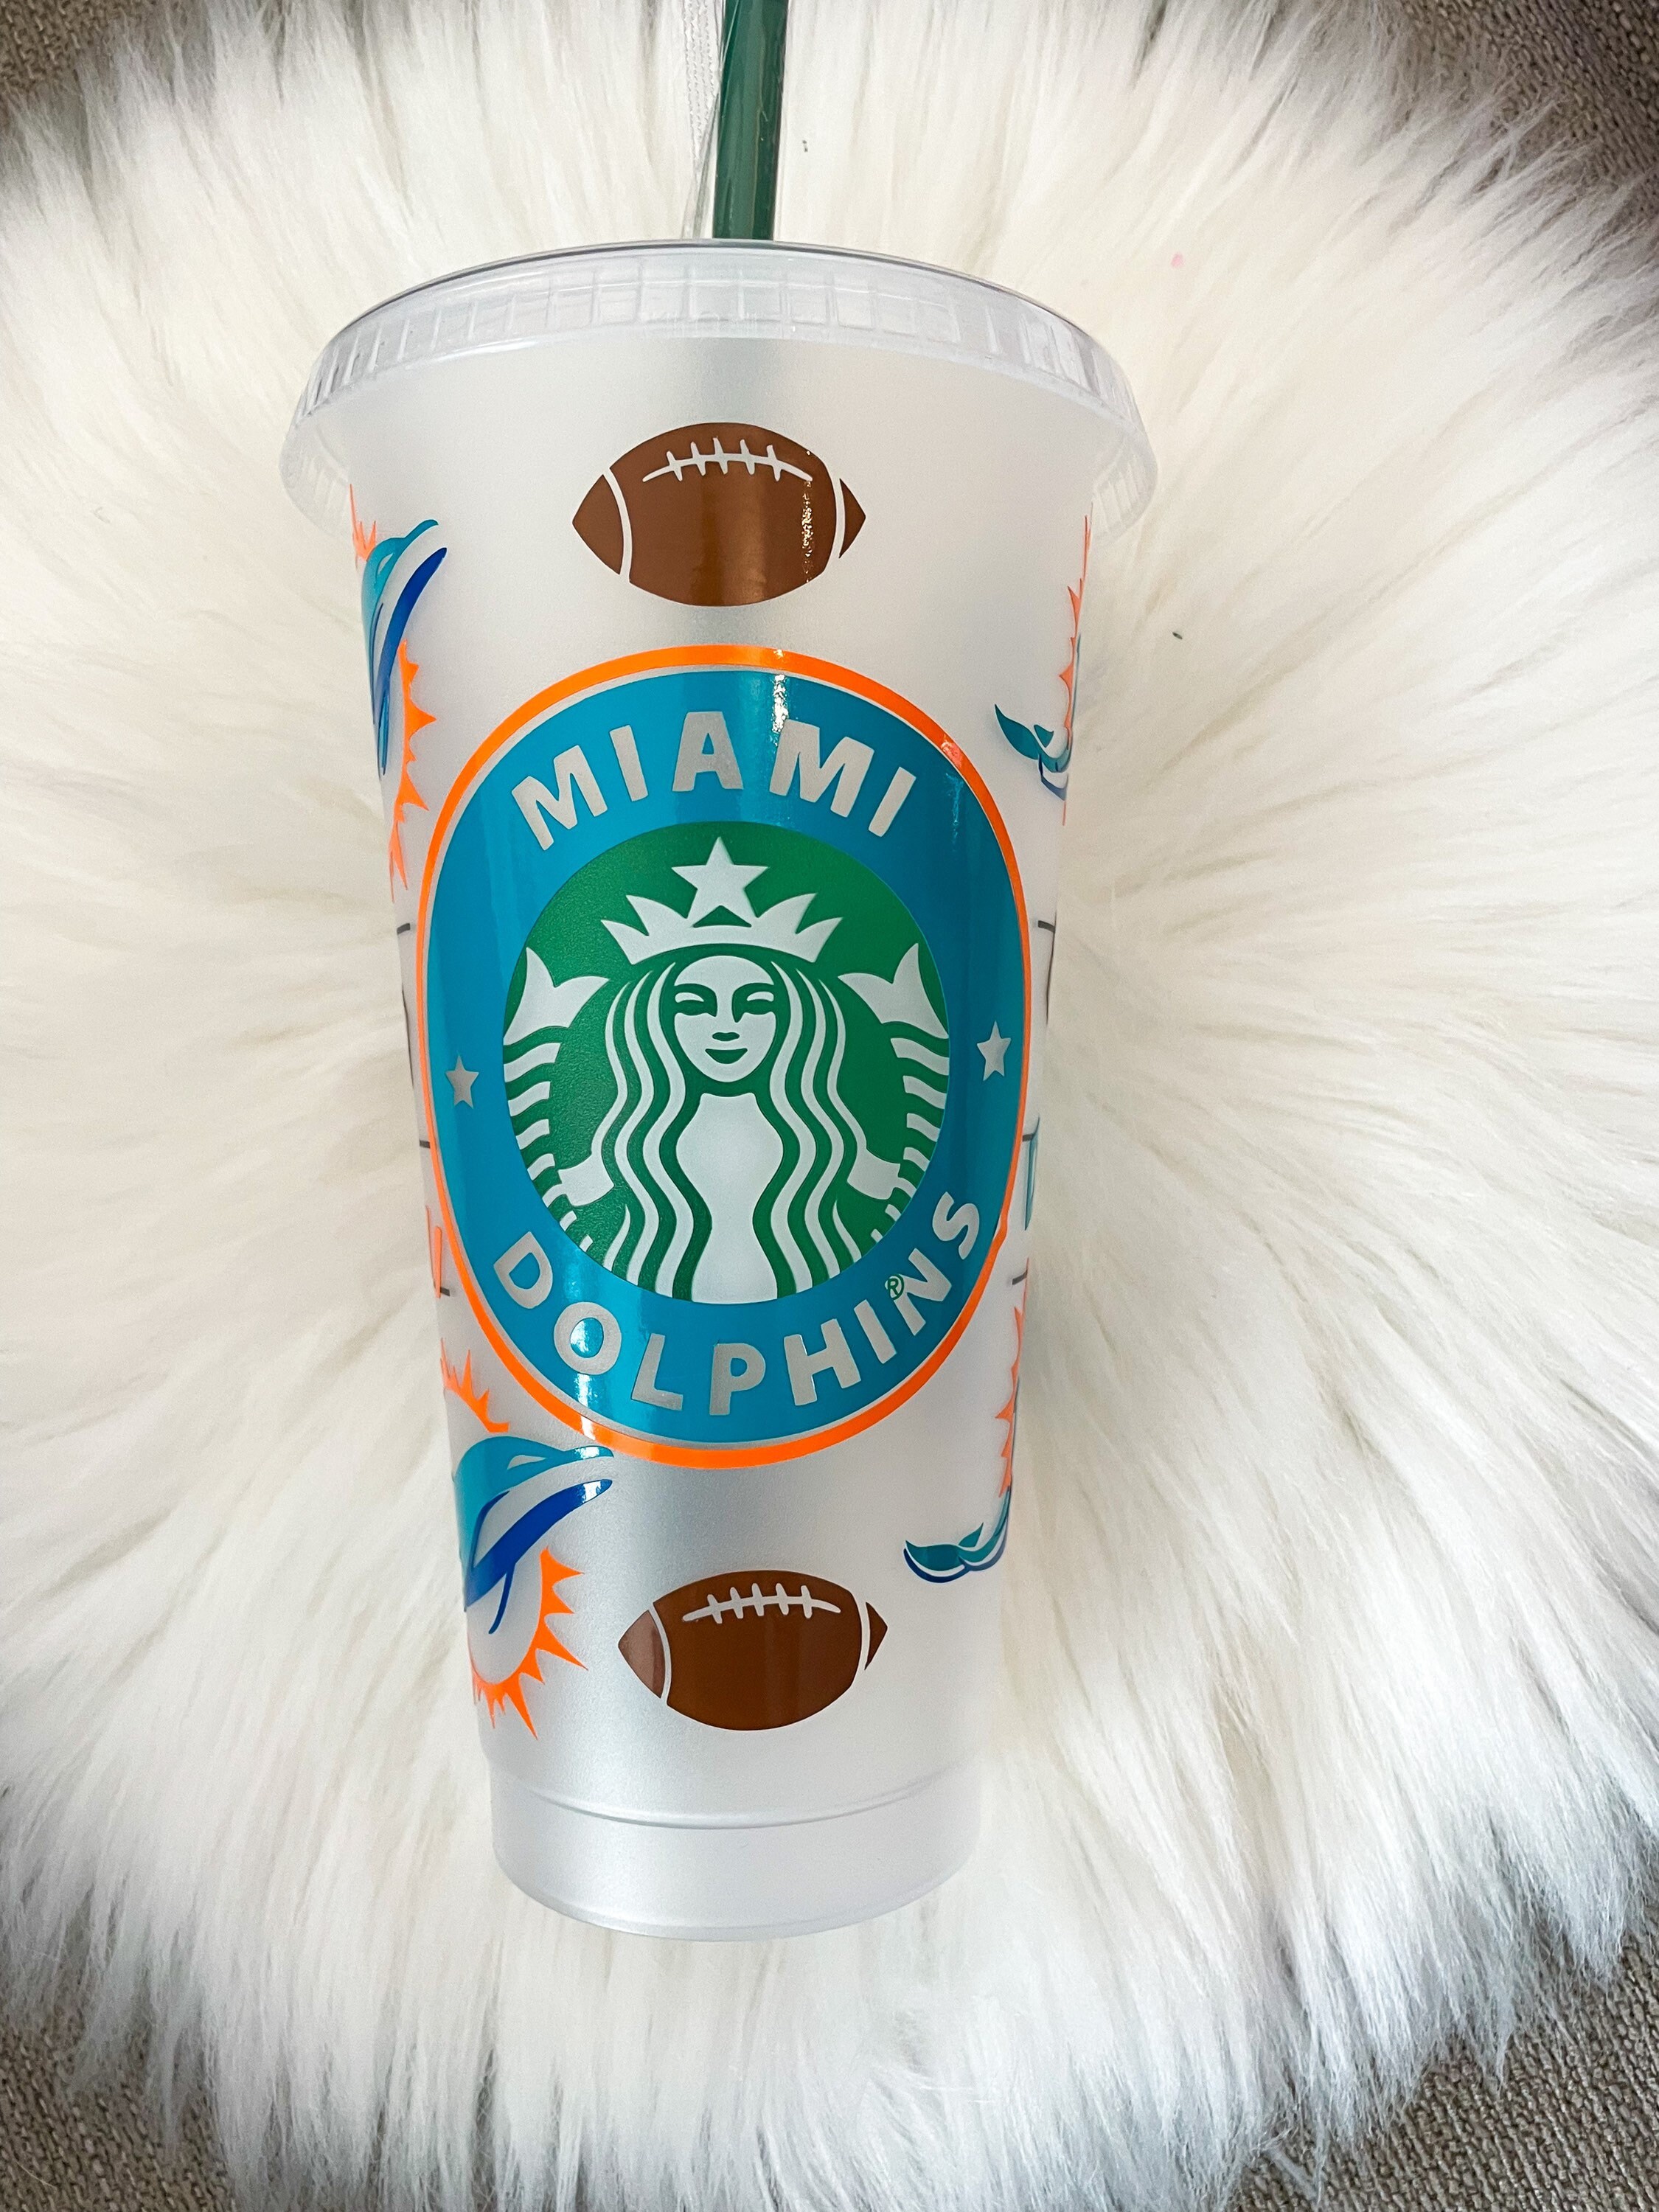 Miami Dolphins Starbucks Cup - Etsy UK